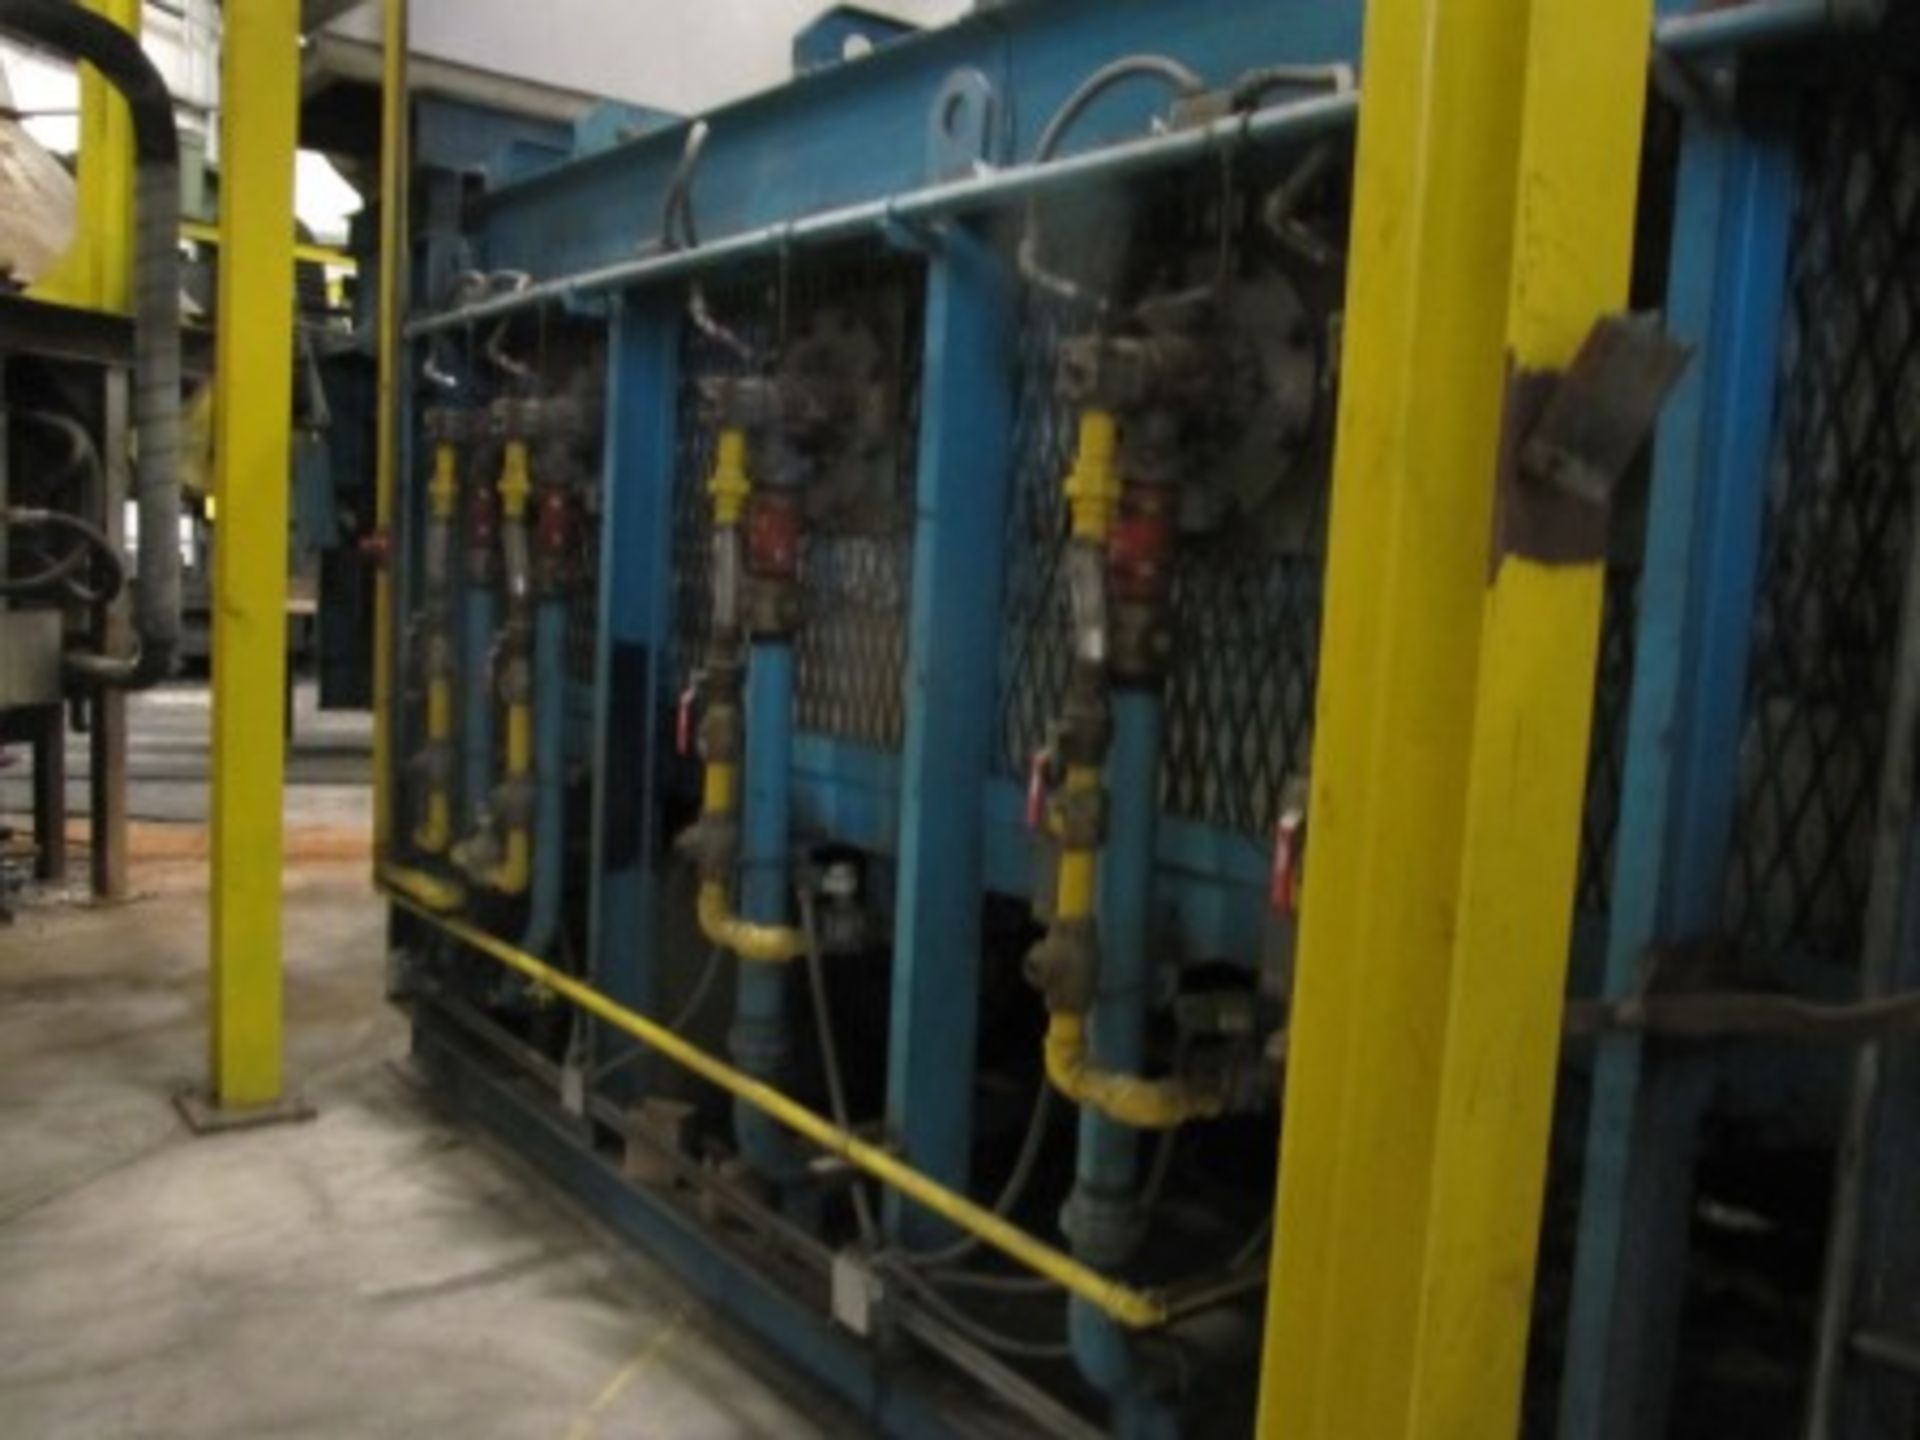 THE FURNACE WORKS PUSH FURNACE 1 PUSHER FURNACE, 9,999,999 BTU, NATURAL GAS, 6'X2' APPROX. OPENING X - Image 4 of 6